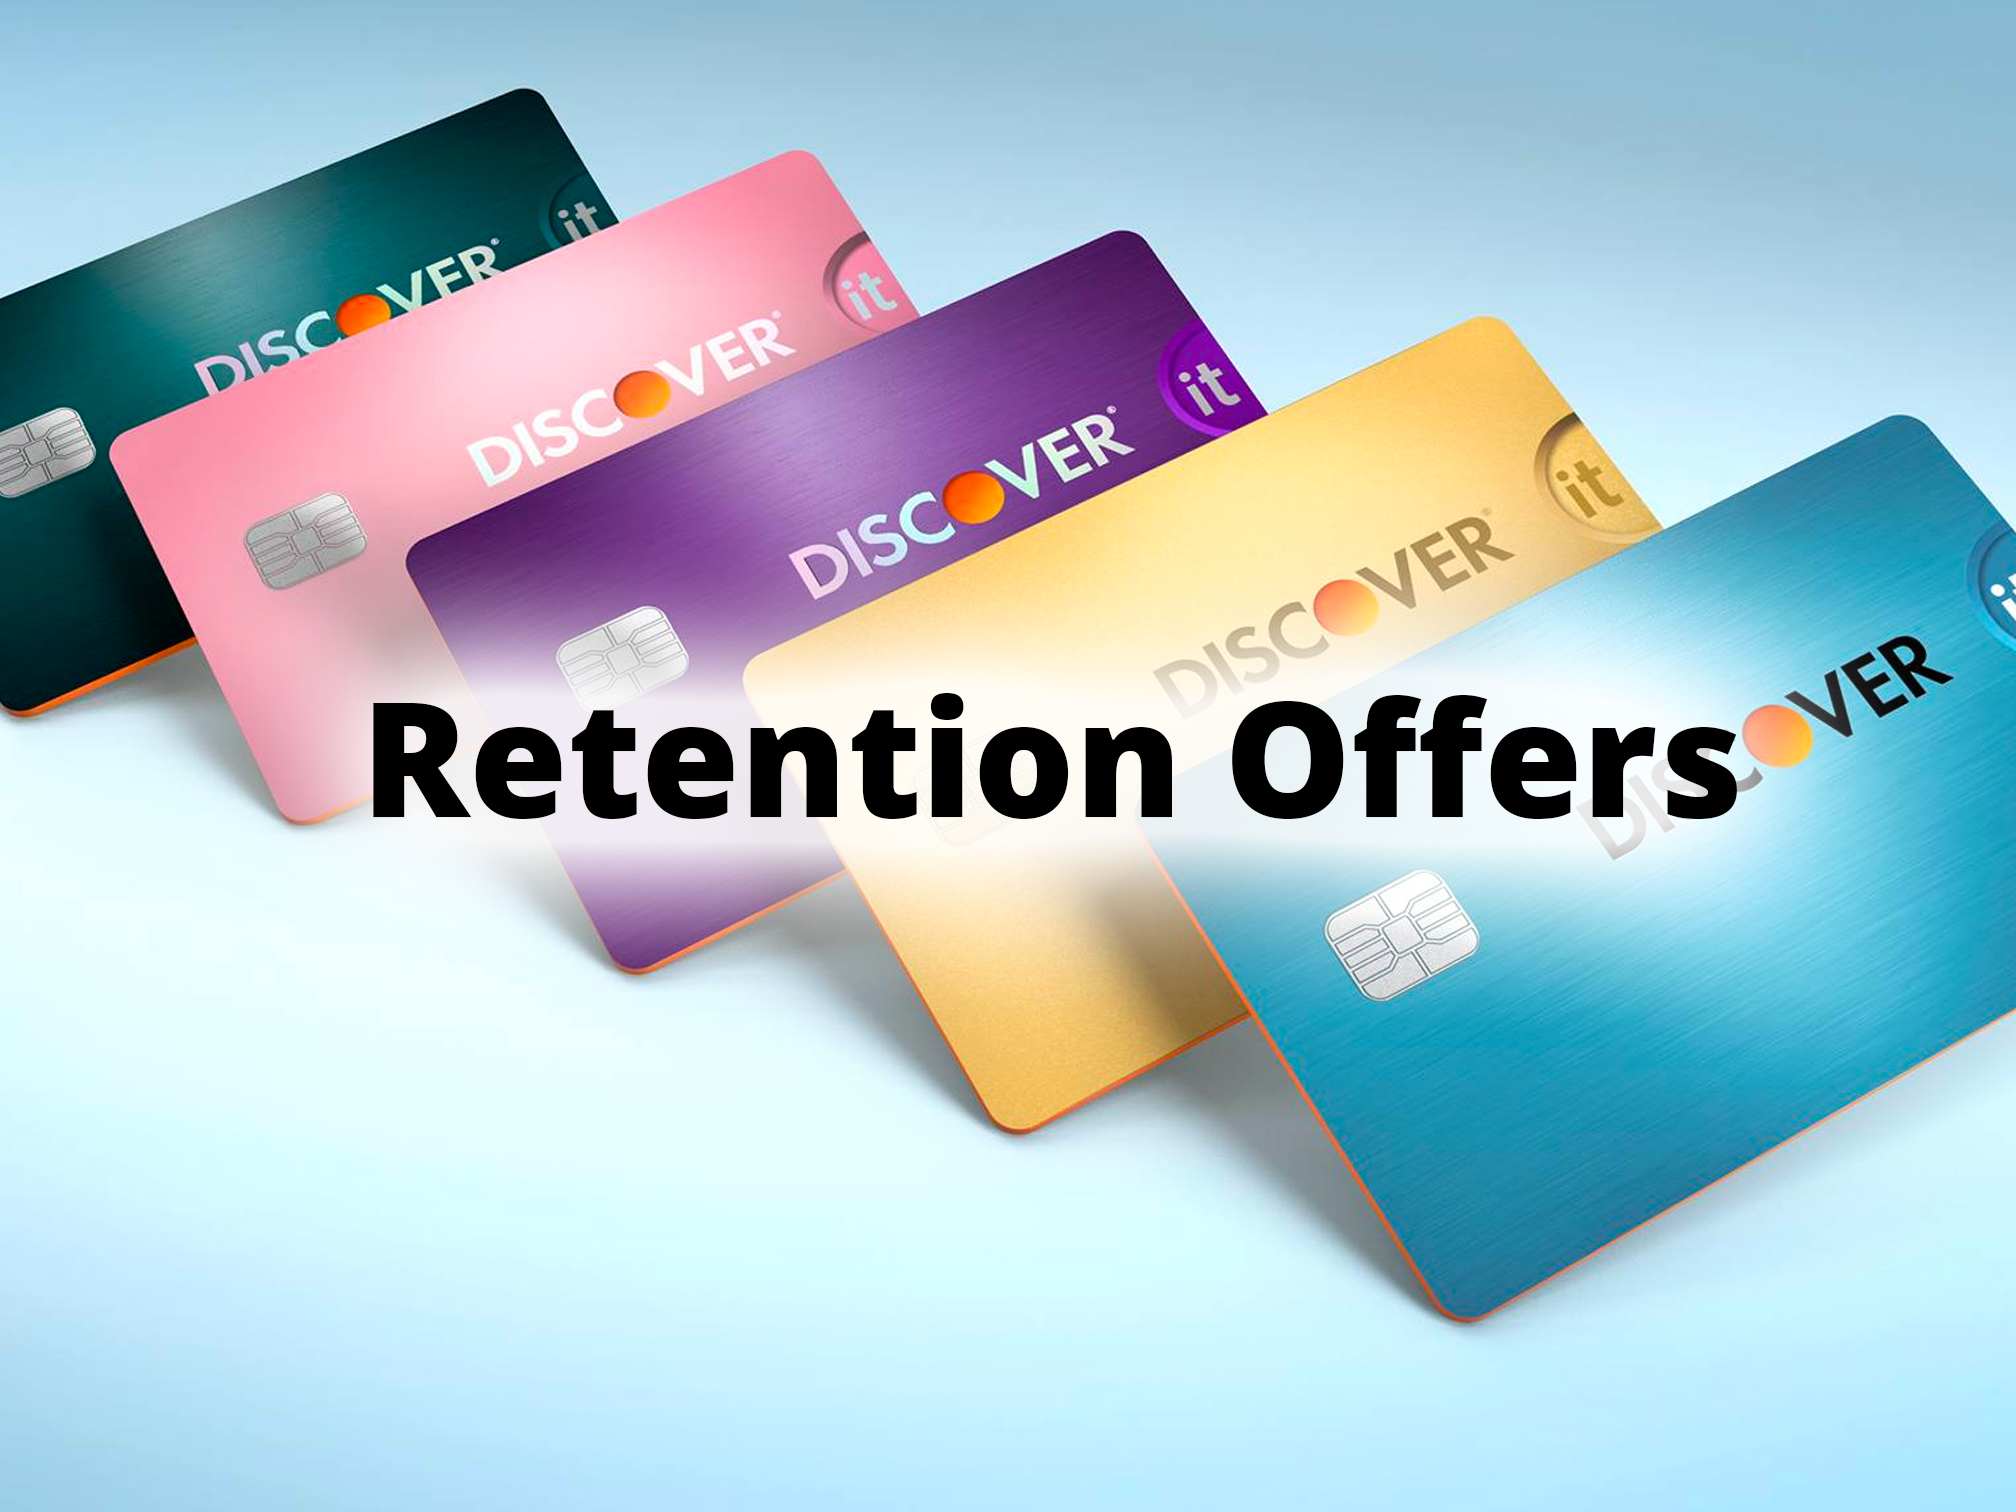 Discover Card retention offers